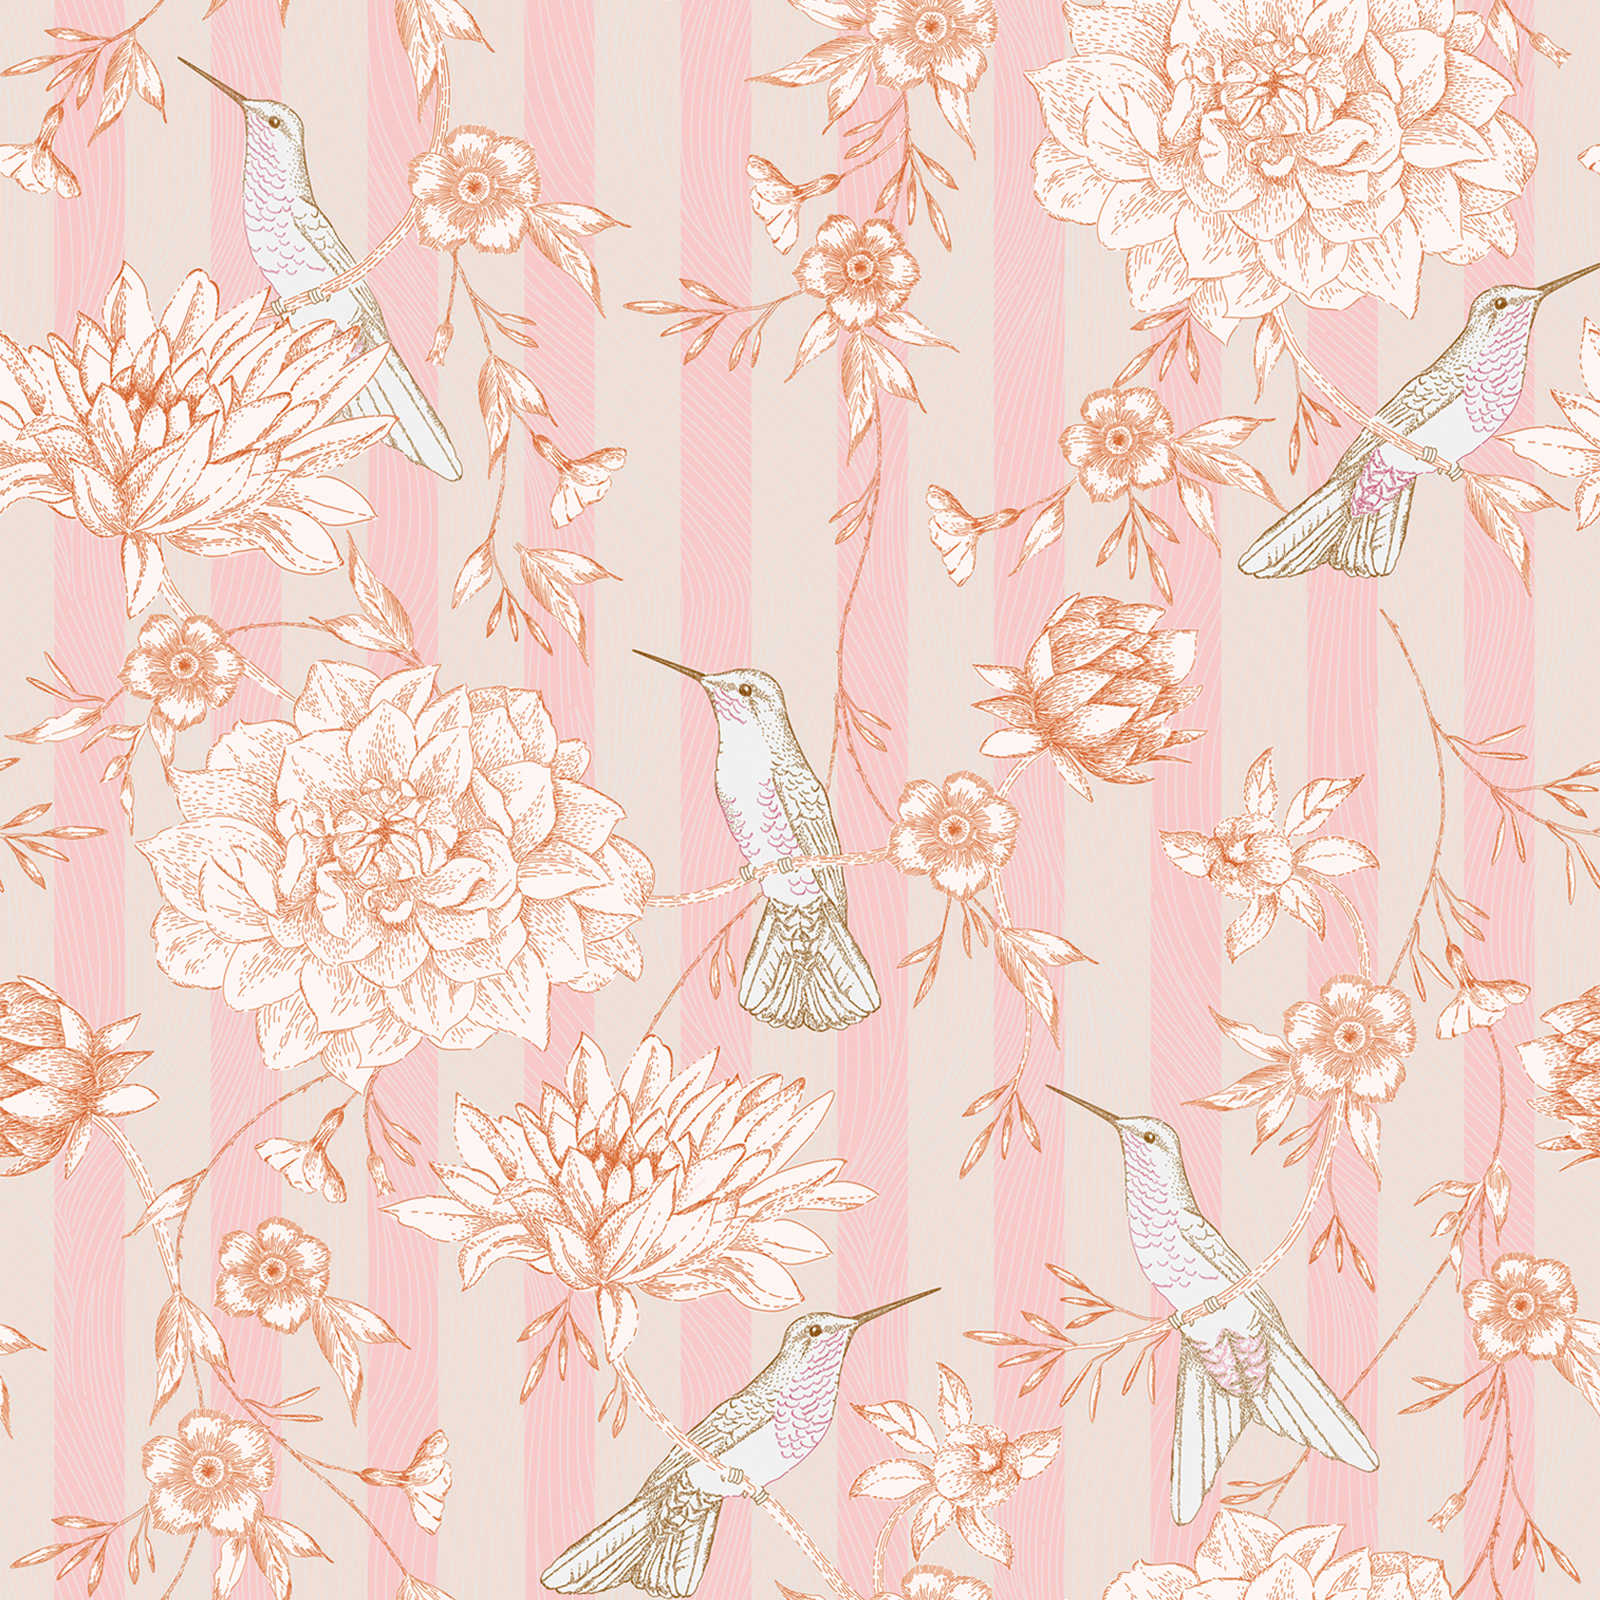 Striped wallpaper with floral motif and birds - pink, beige, orange
